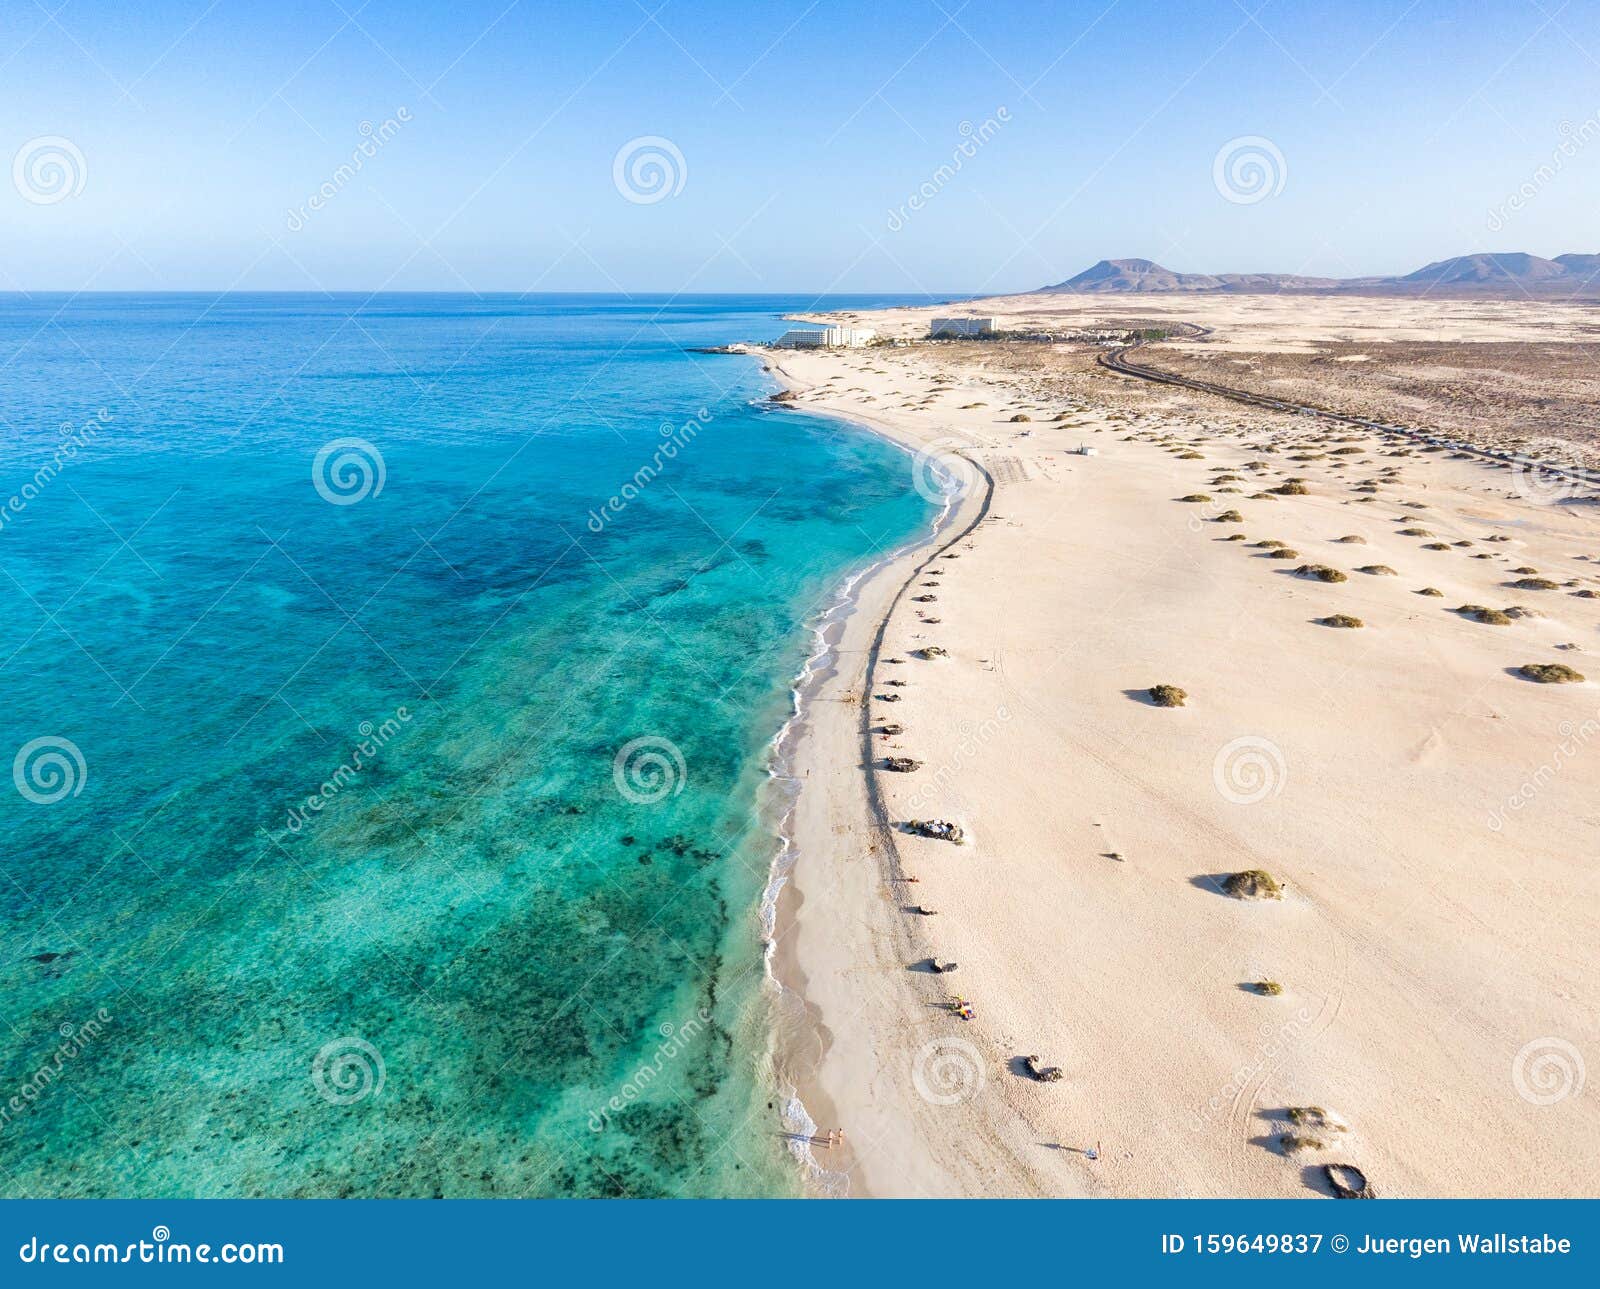 panoramic high angle aerial drone view of corralejo national park parque natural de corralejo with sand dunes